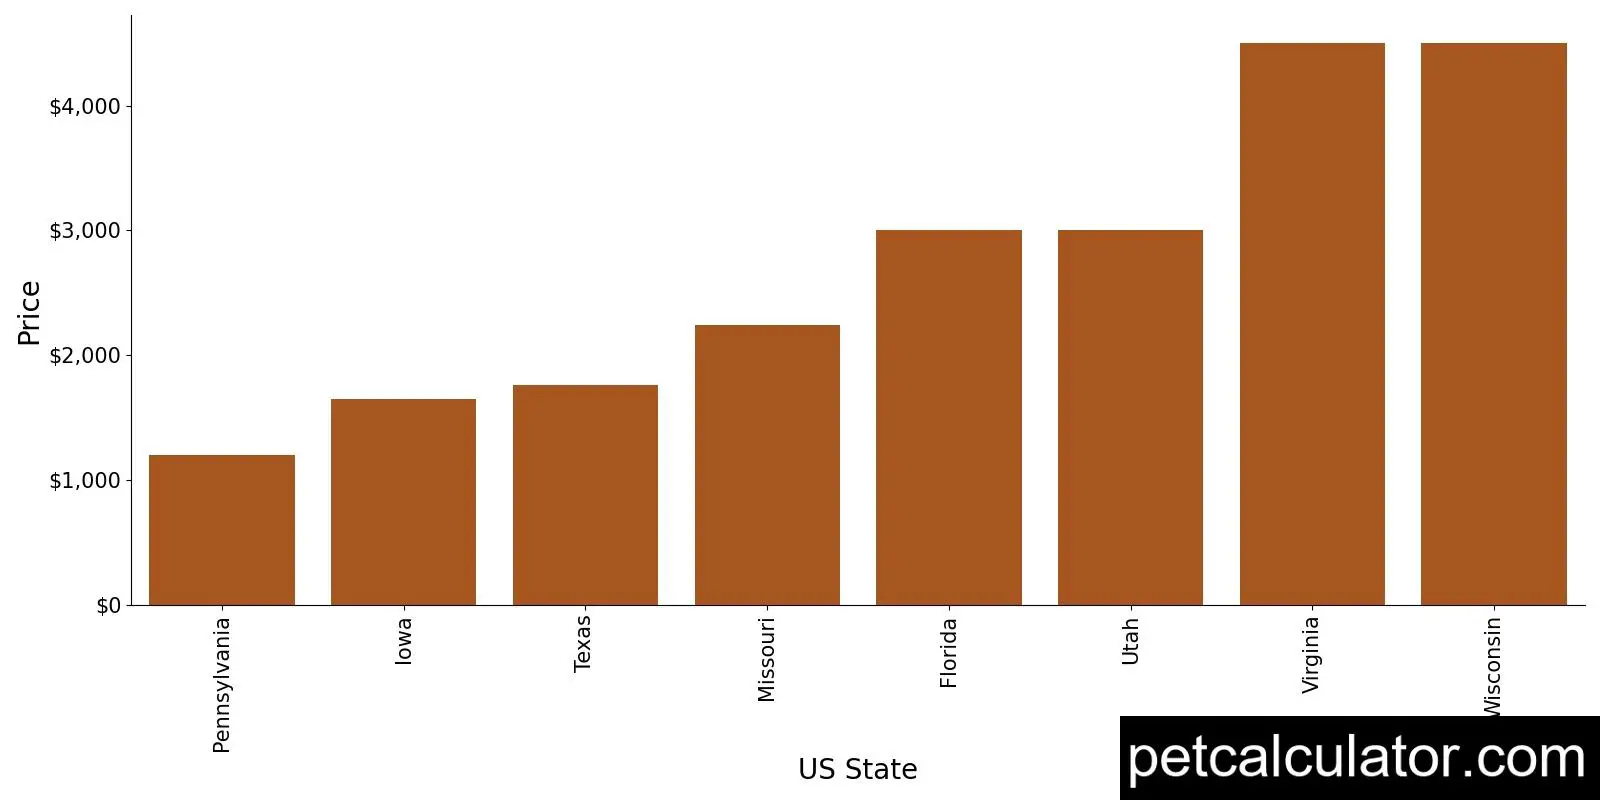 Price of Norwich Terrier by US State 